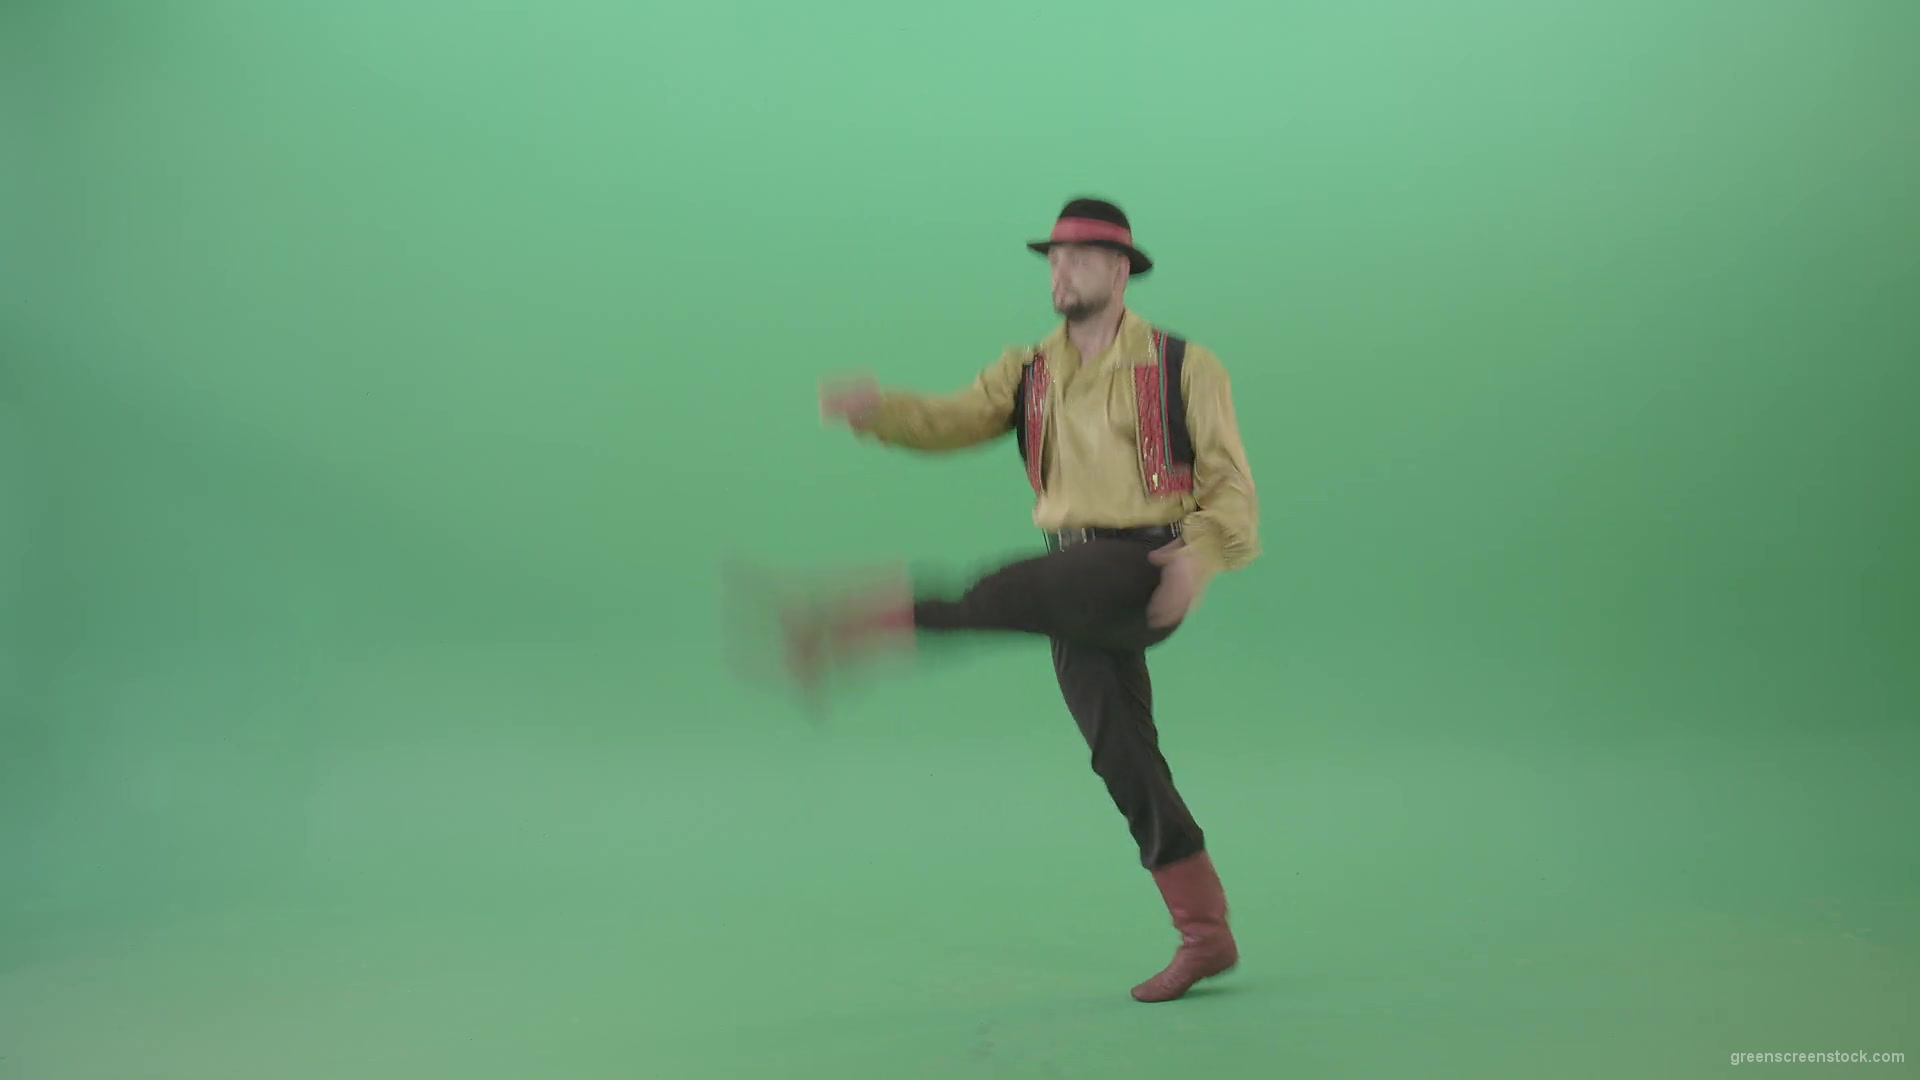 Balcan-gipsy-man-dancer-showing-clapping-moves-isolated-on-green-screen-4K-Video-Footage-1920_004 Green Screen Stock